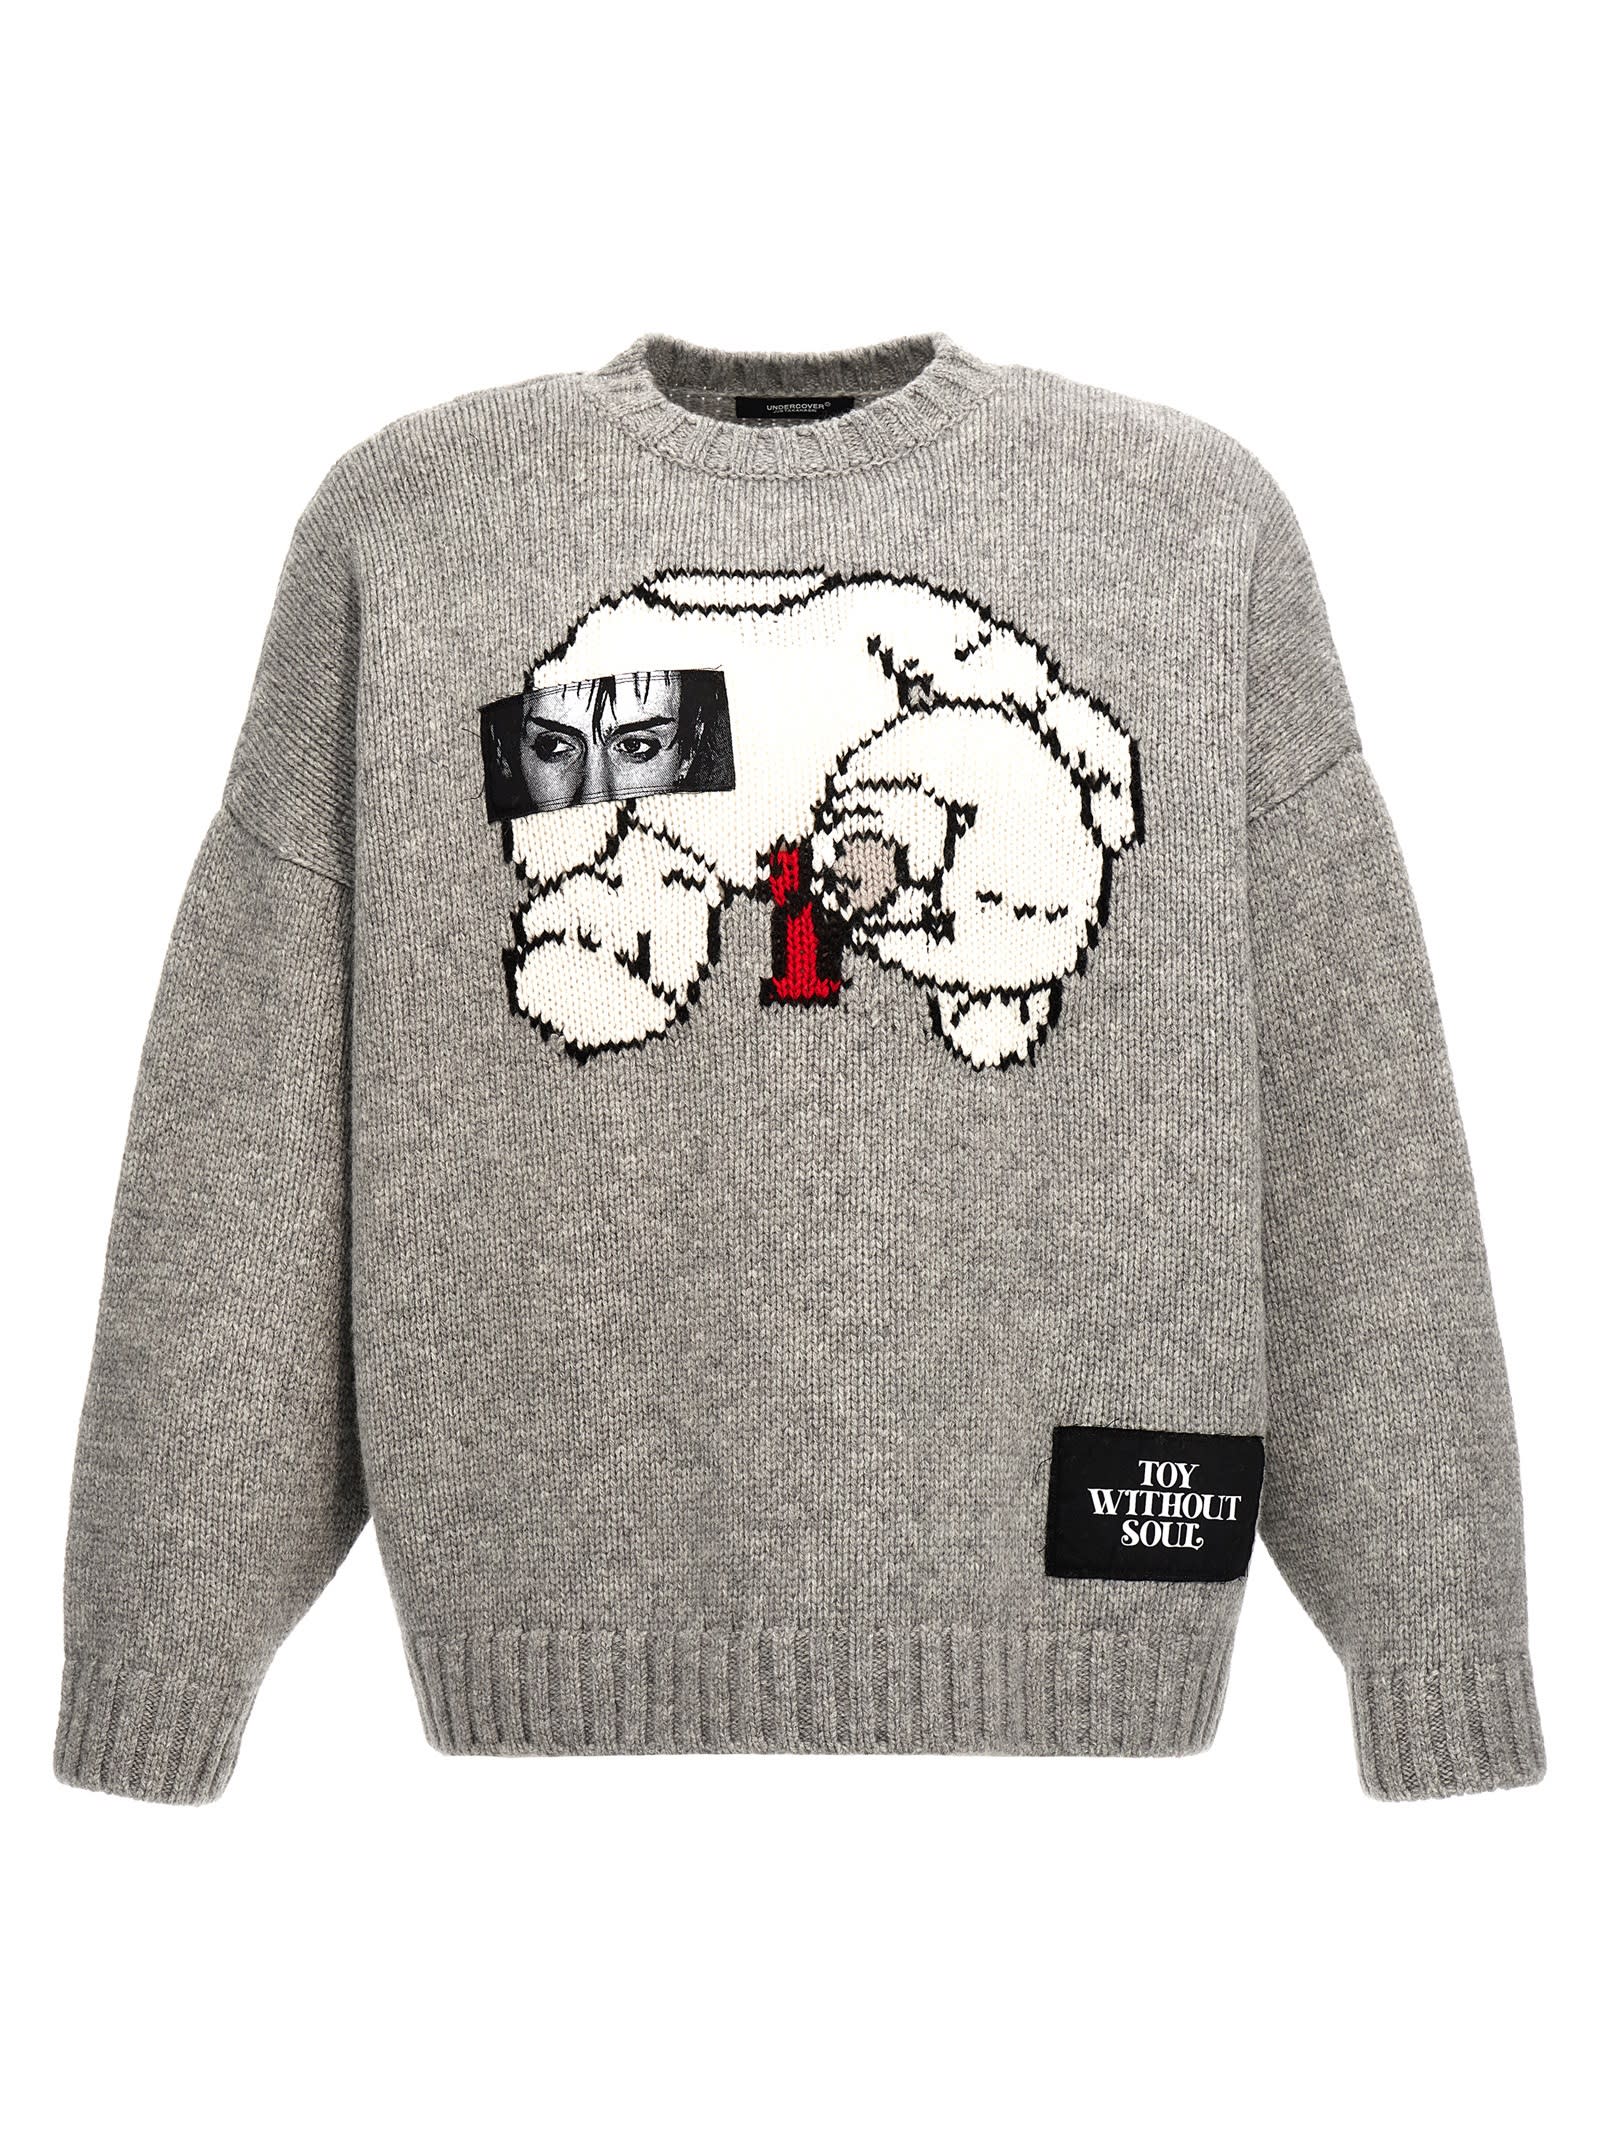 UNDERCOVER PATCHES SWEATER